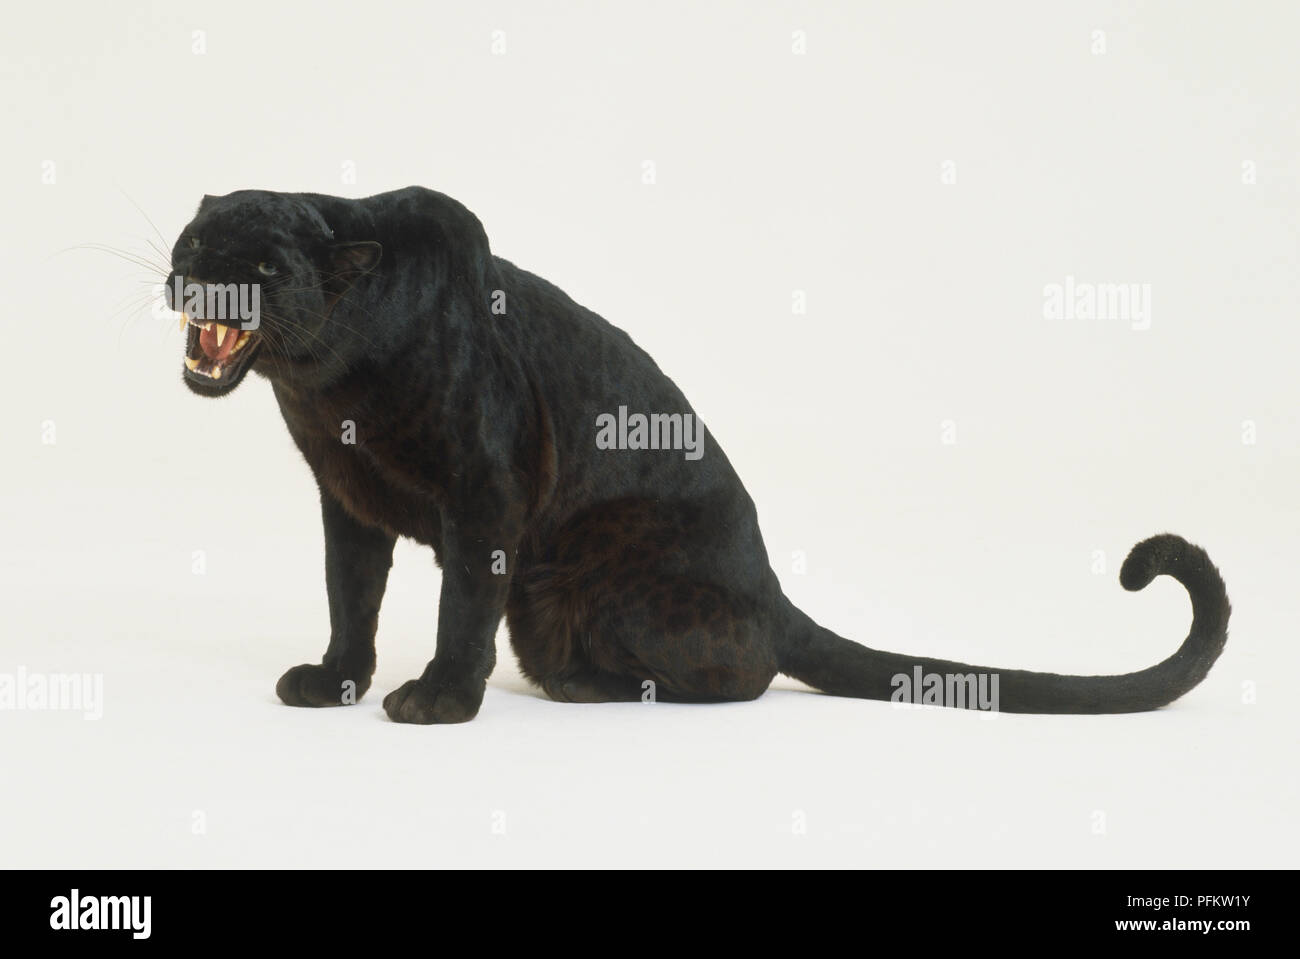 Sitting Black Leopard or Black Panther (Panthera pardus) roaring and baring its teeth, side view. Stock Photo